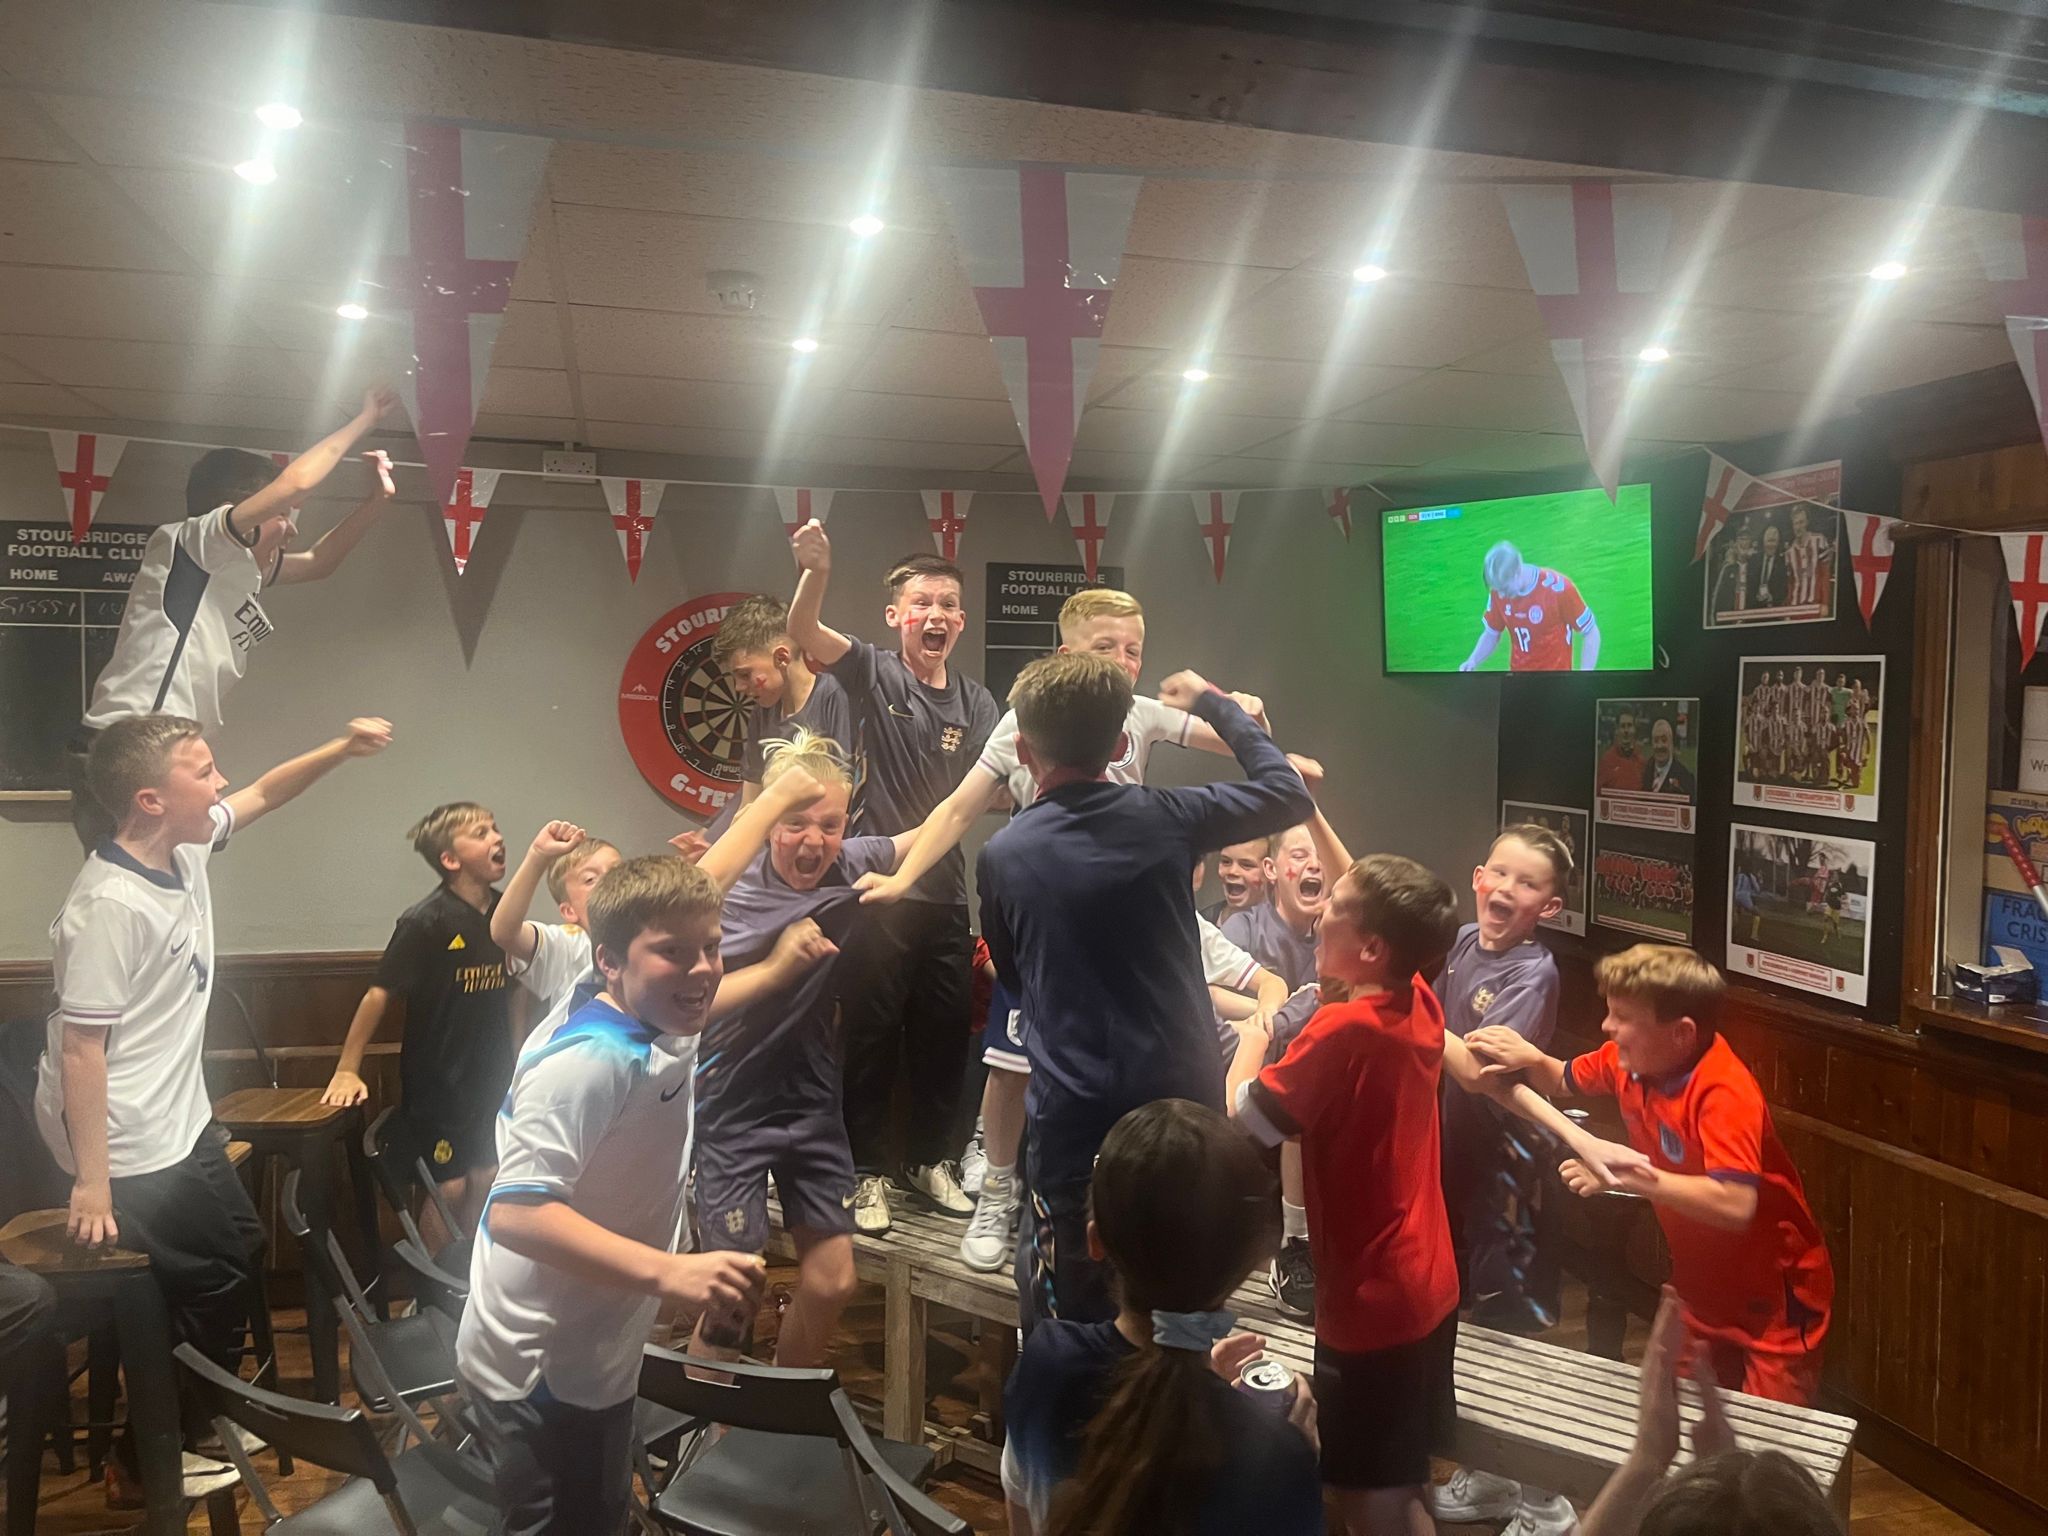 The children of Stourbridge cheer England's goal in front of a TV screen